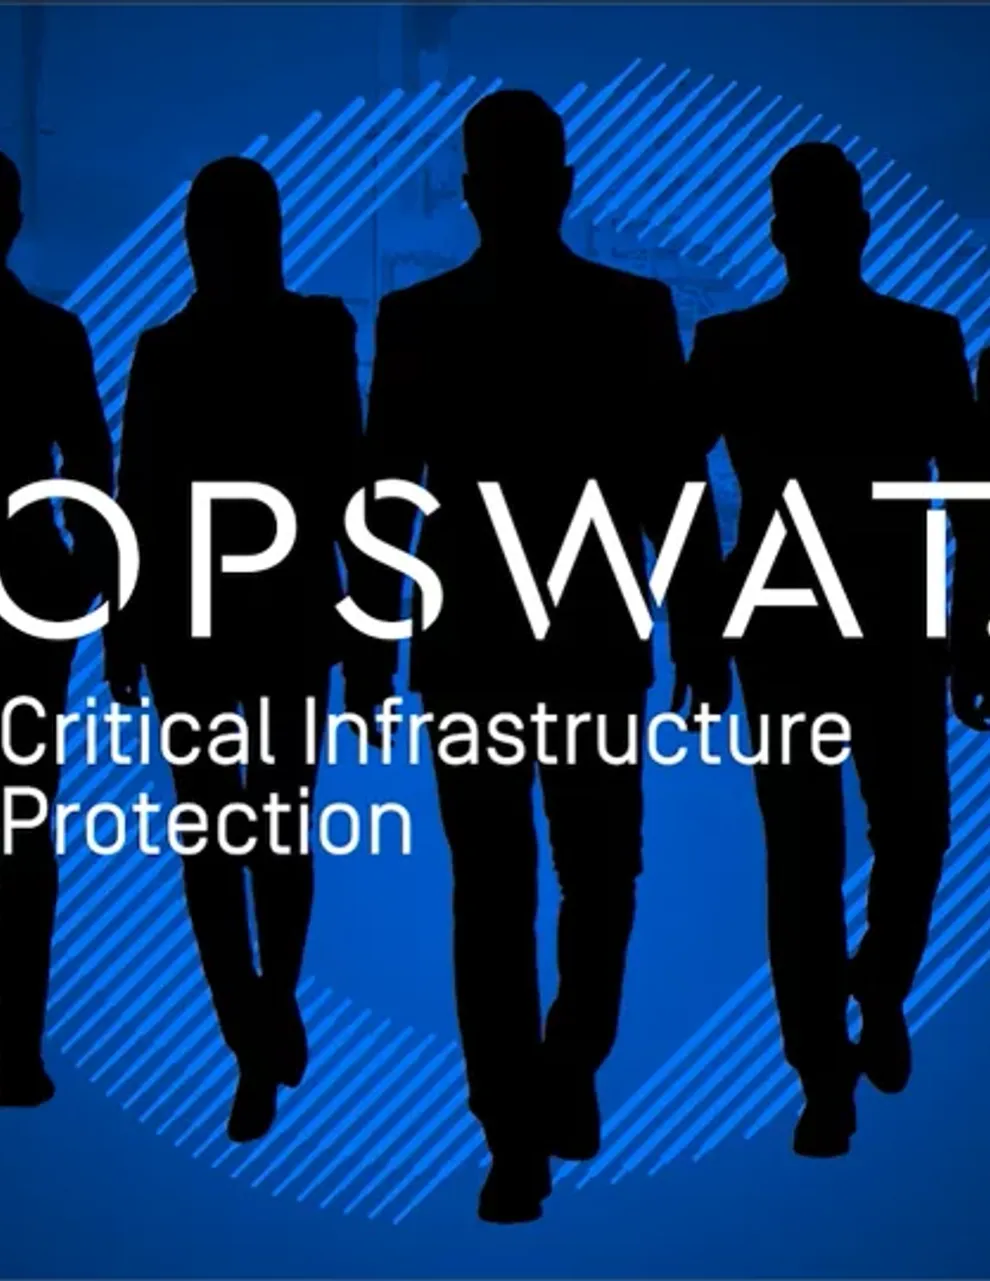 About OPSWAT